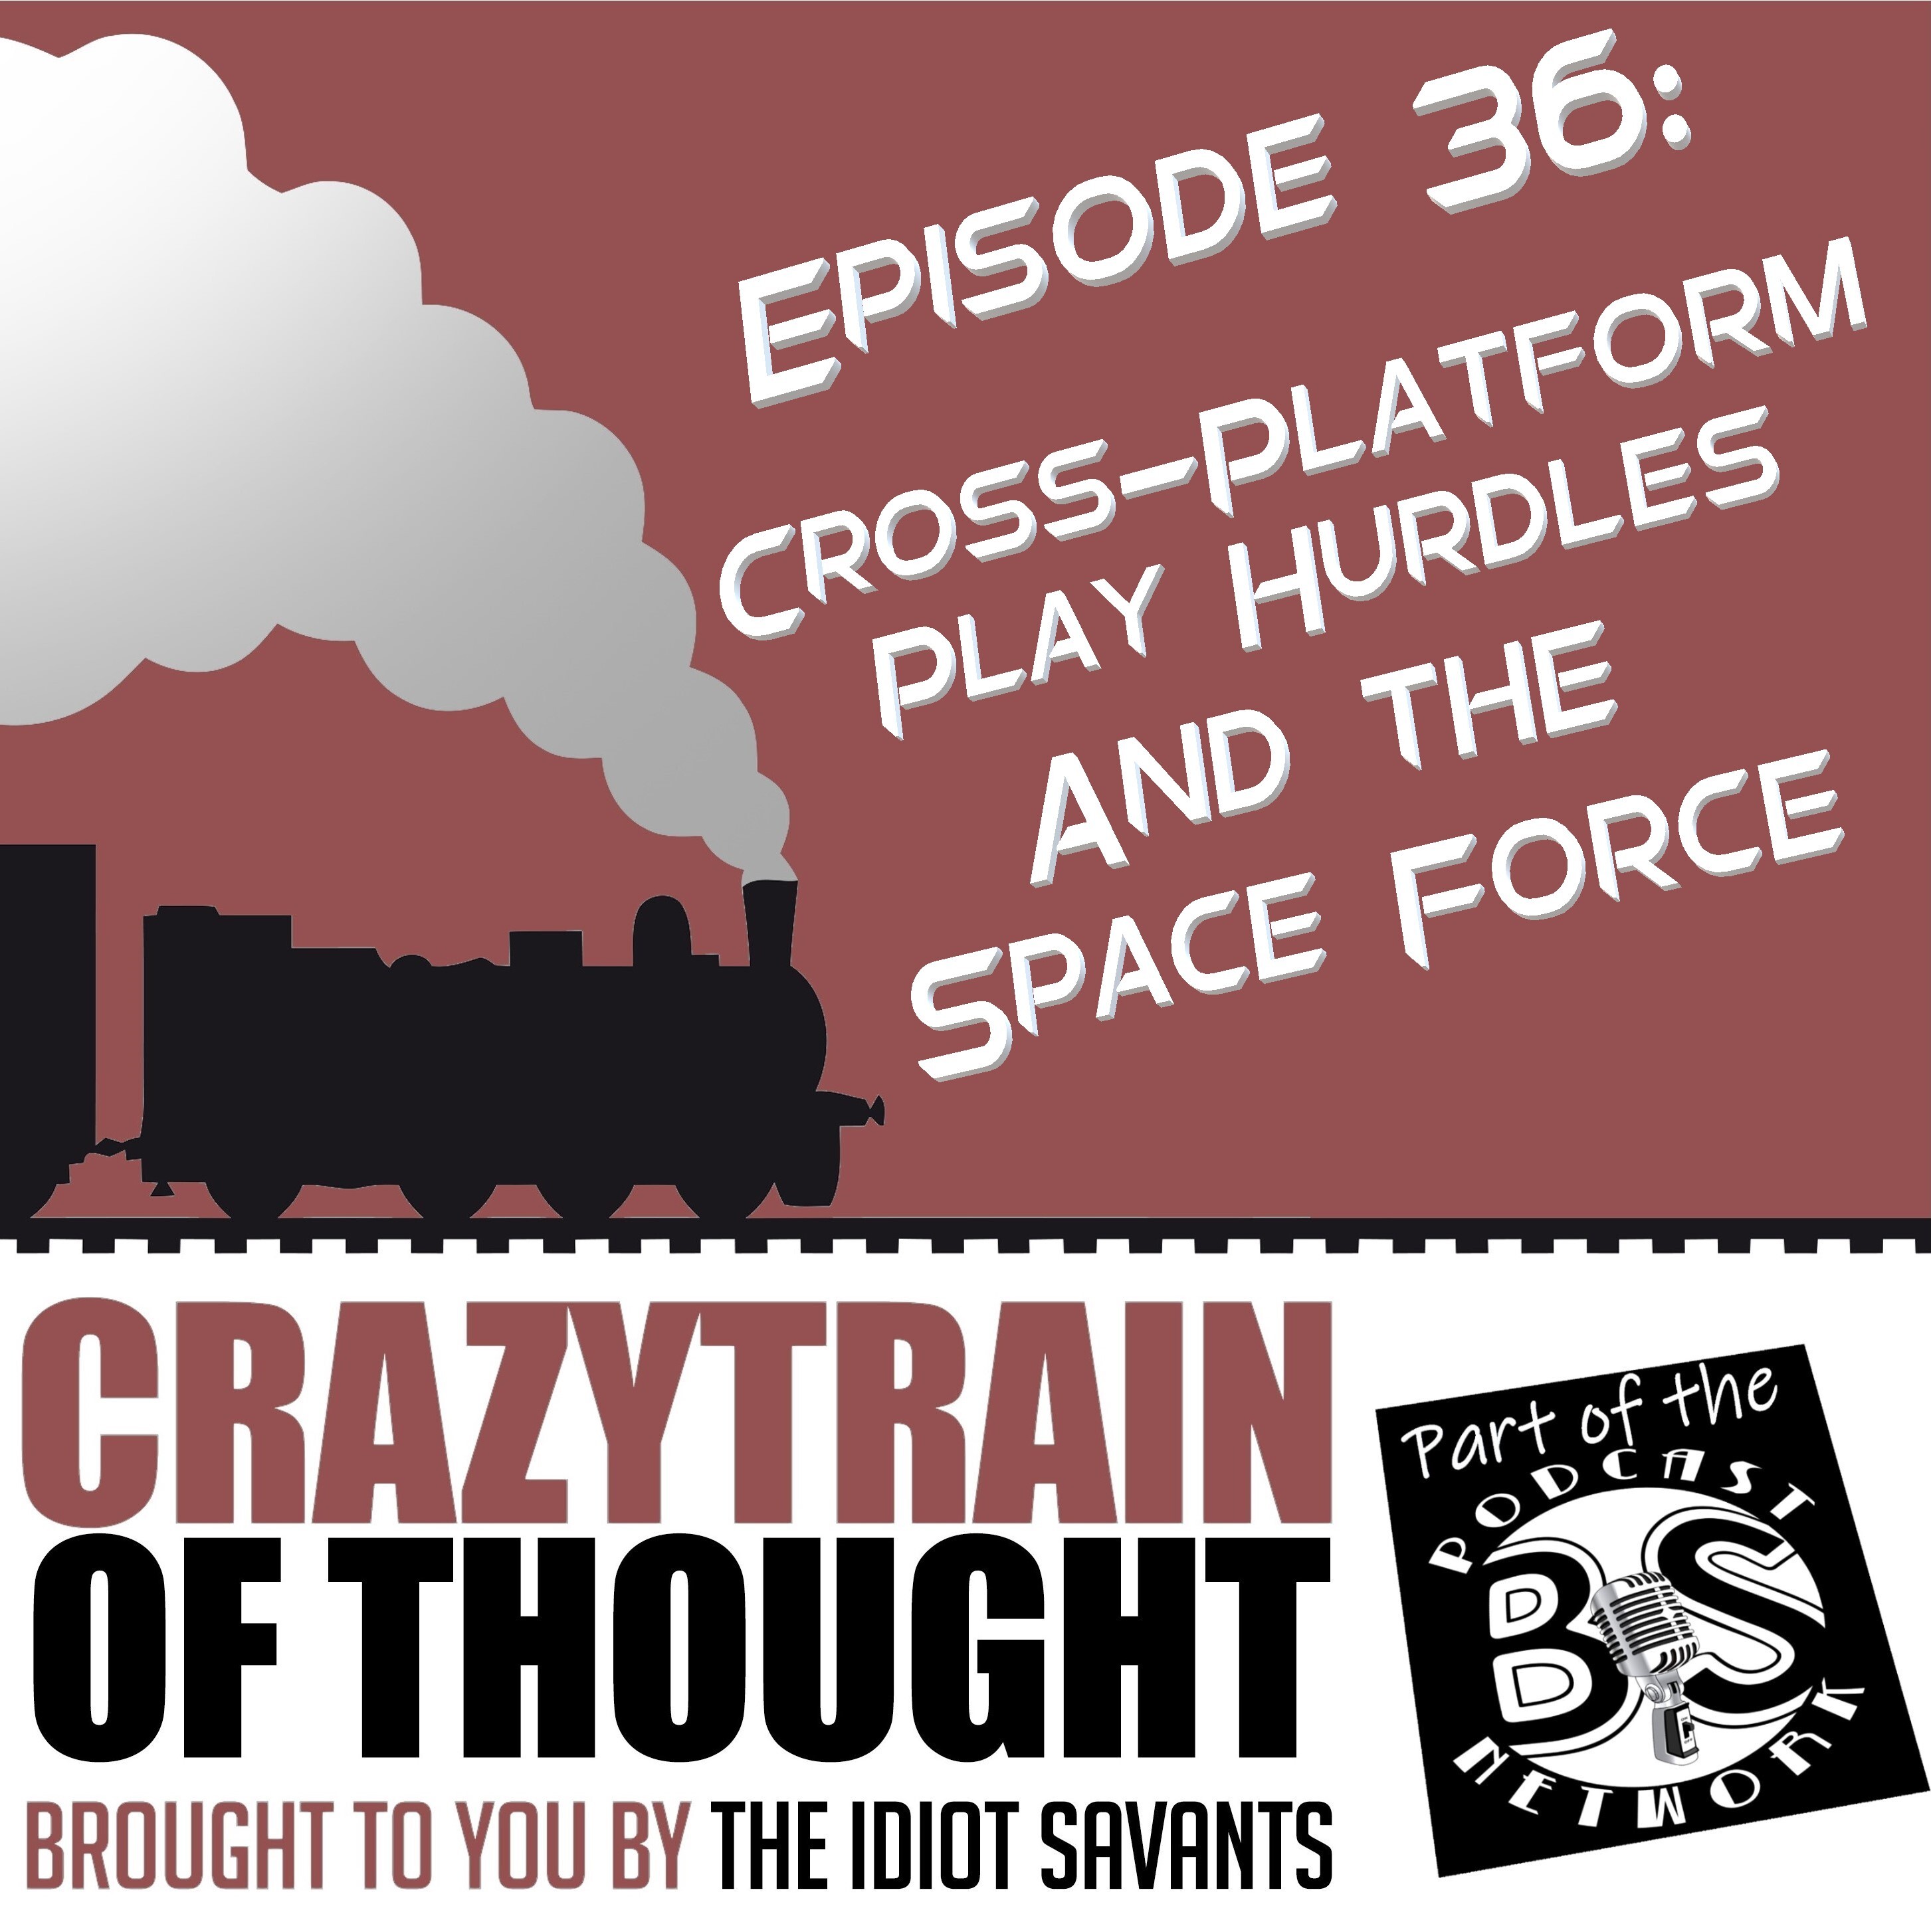 36: Cross-Platform Play Hurdles and the Space Force